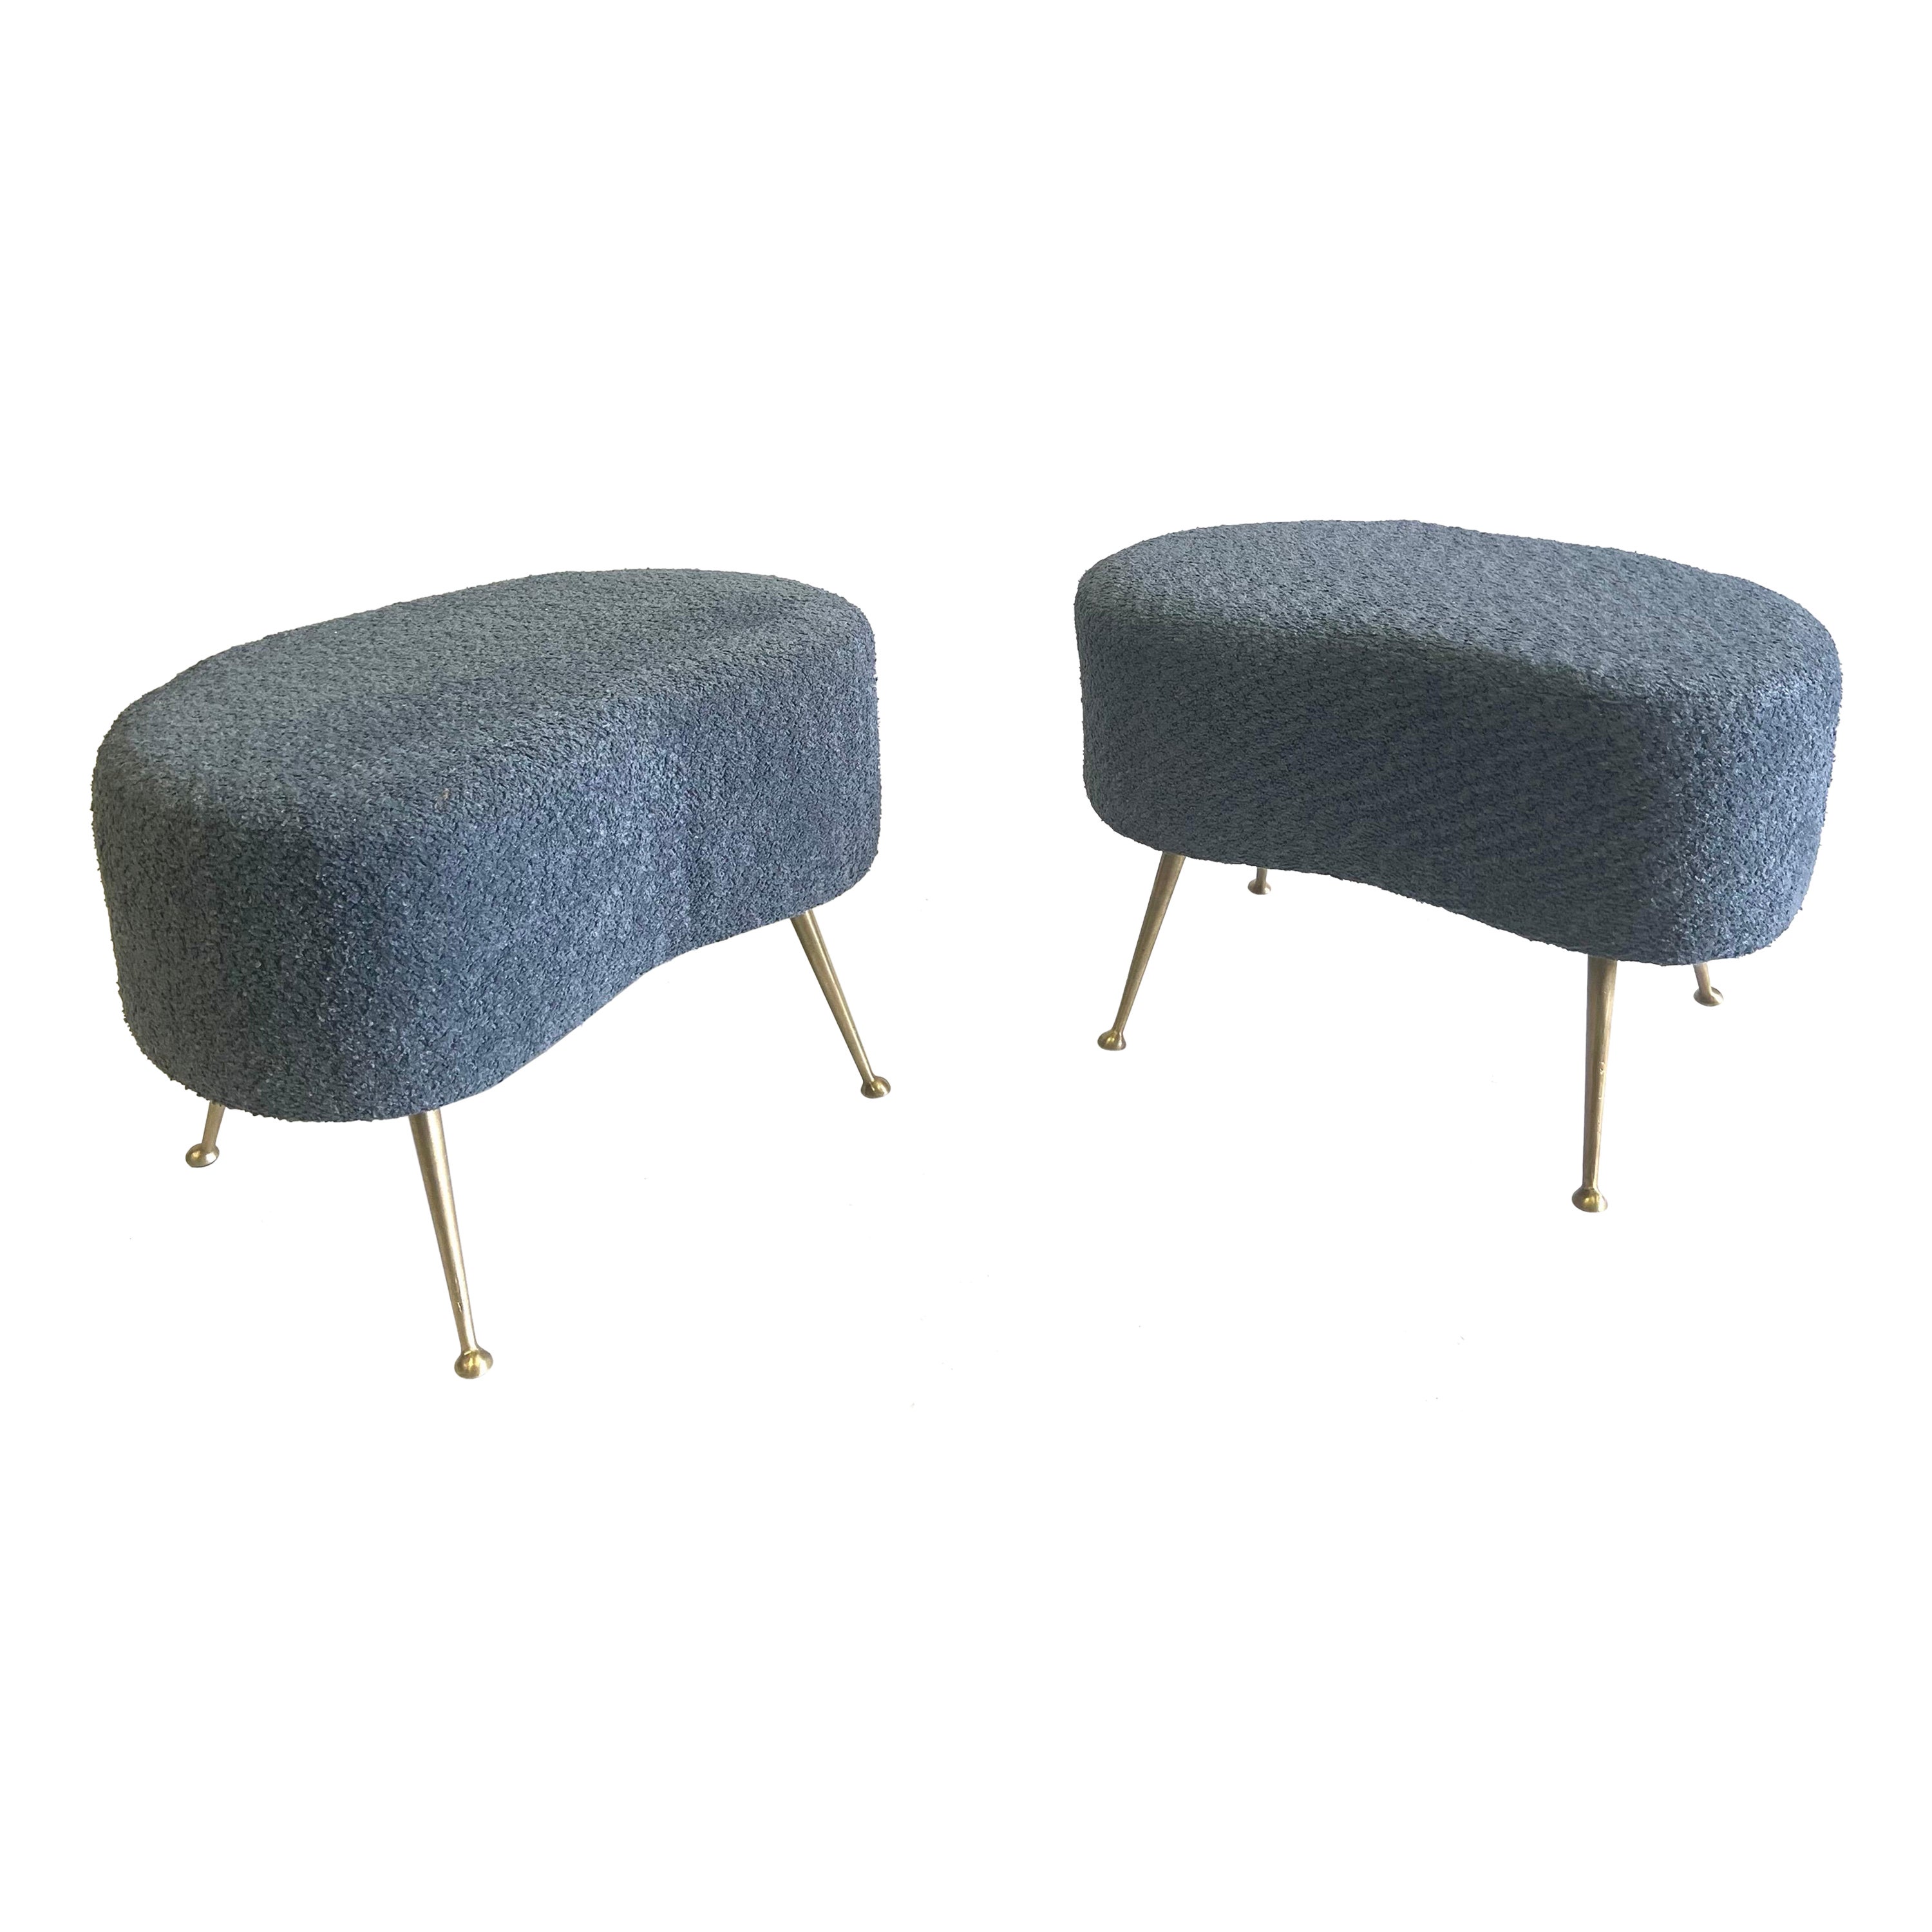 Pair of Italian Mid-Century Organic Modern Stools attributed to Marco Zanuso For Sale